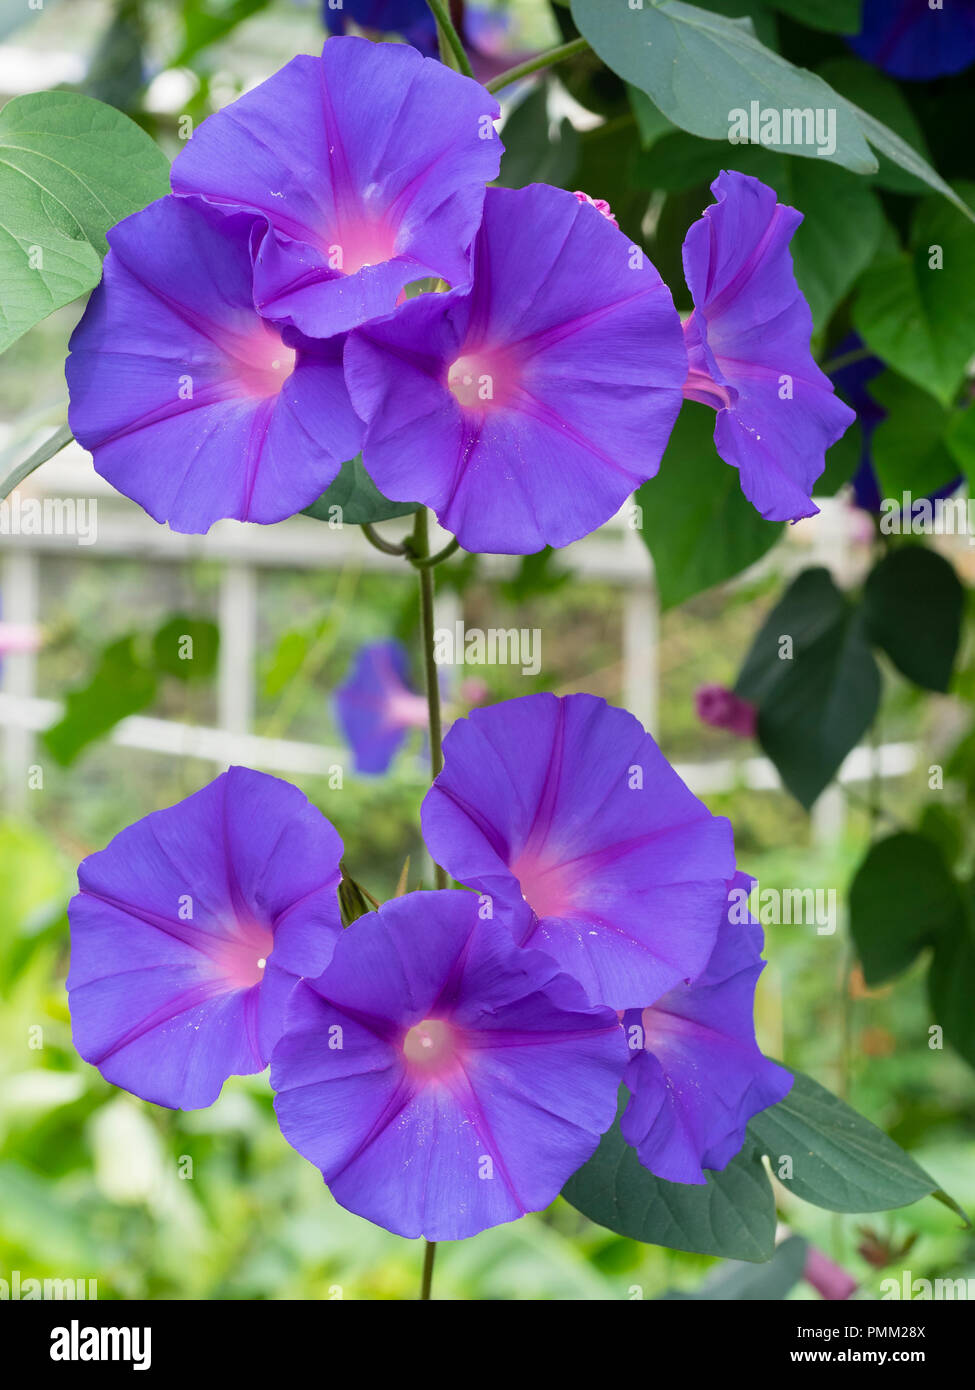 Blue trumpet flowers of the subtropical climber, Ipomea indica.  Weed species in warm climates, exotic gardening in cool. Stock Photo